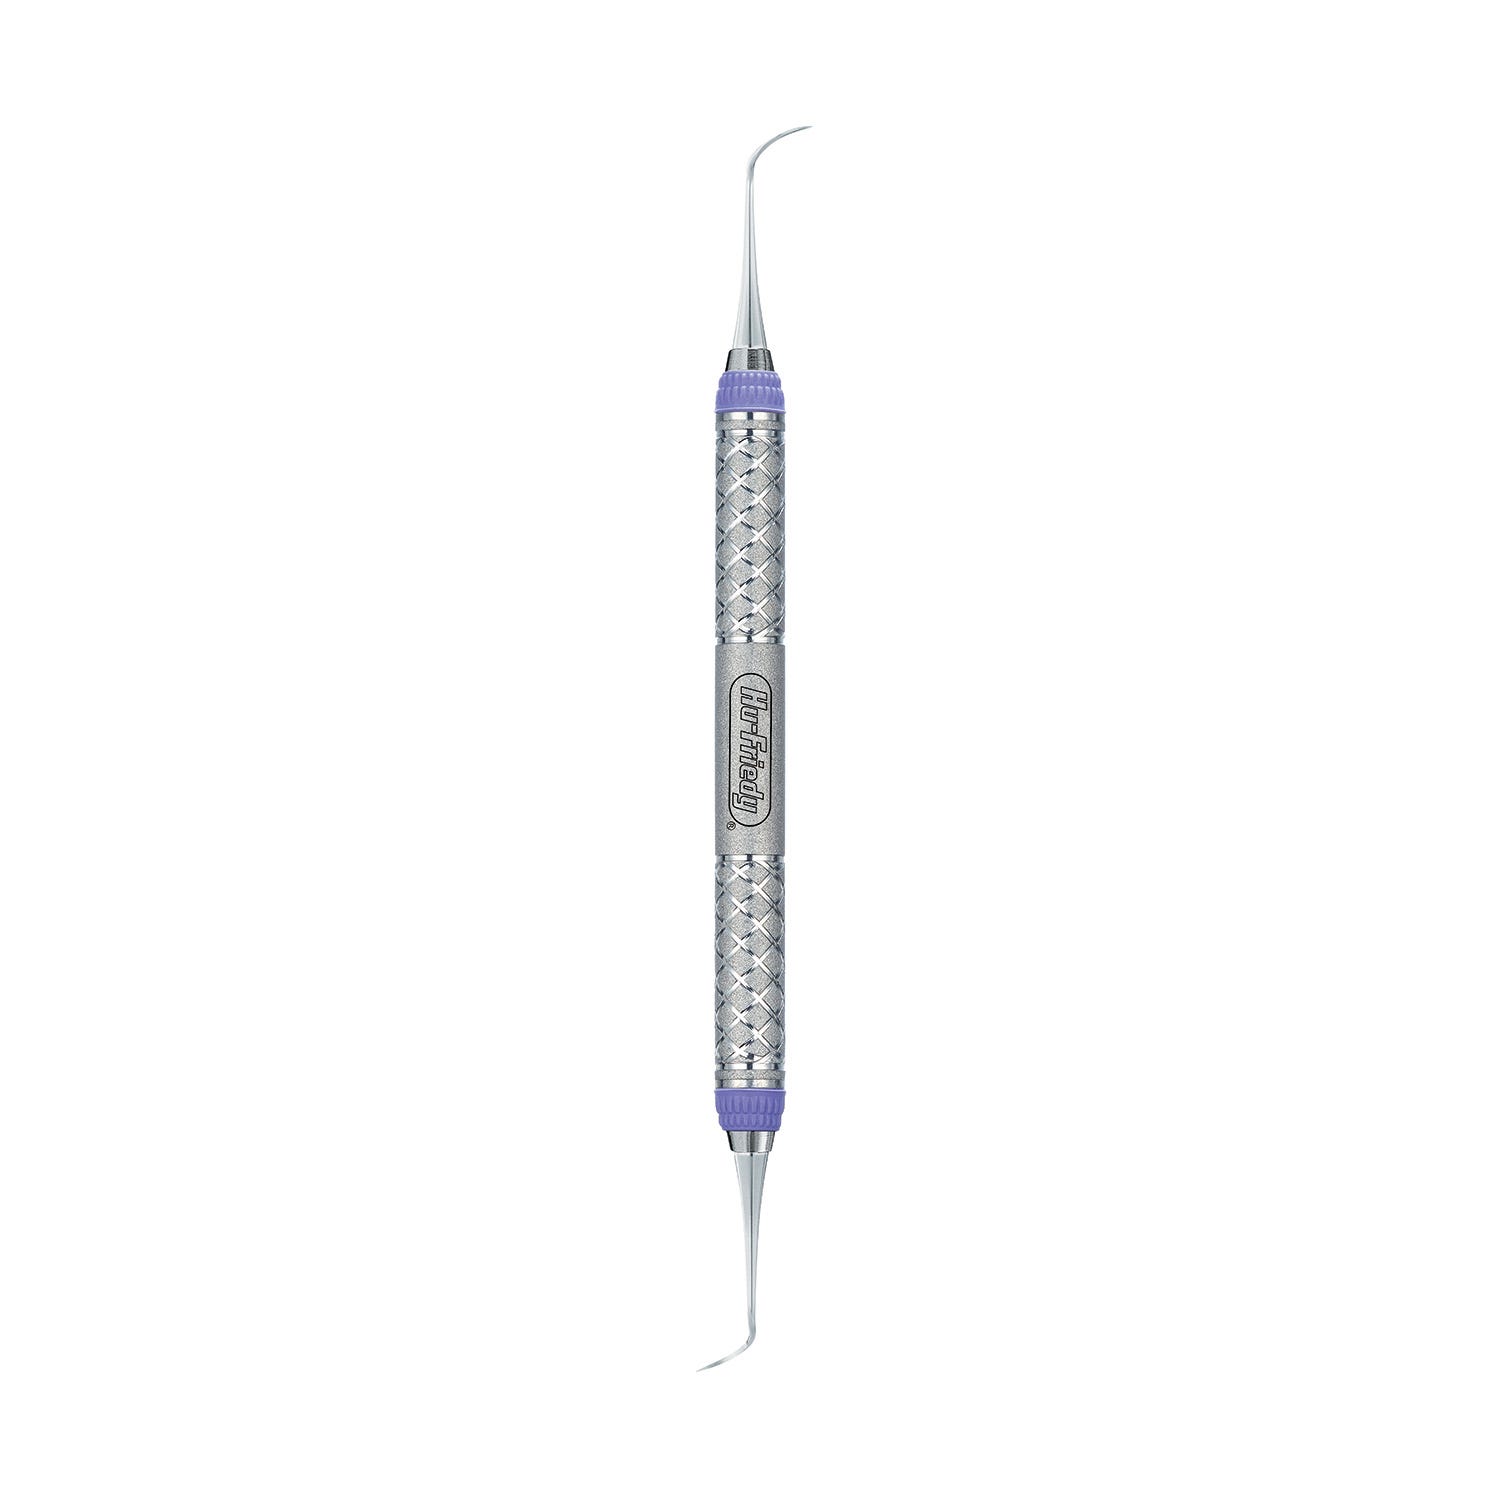 Scaler Nevi Posterior Everedge 2.0 #9 Handle Double Ended